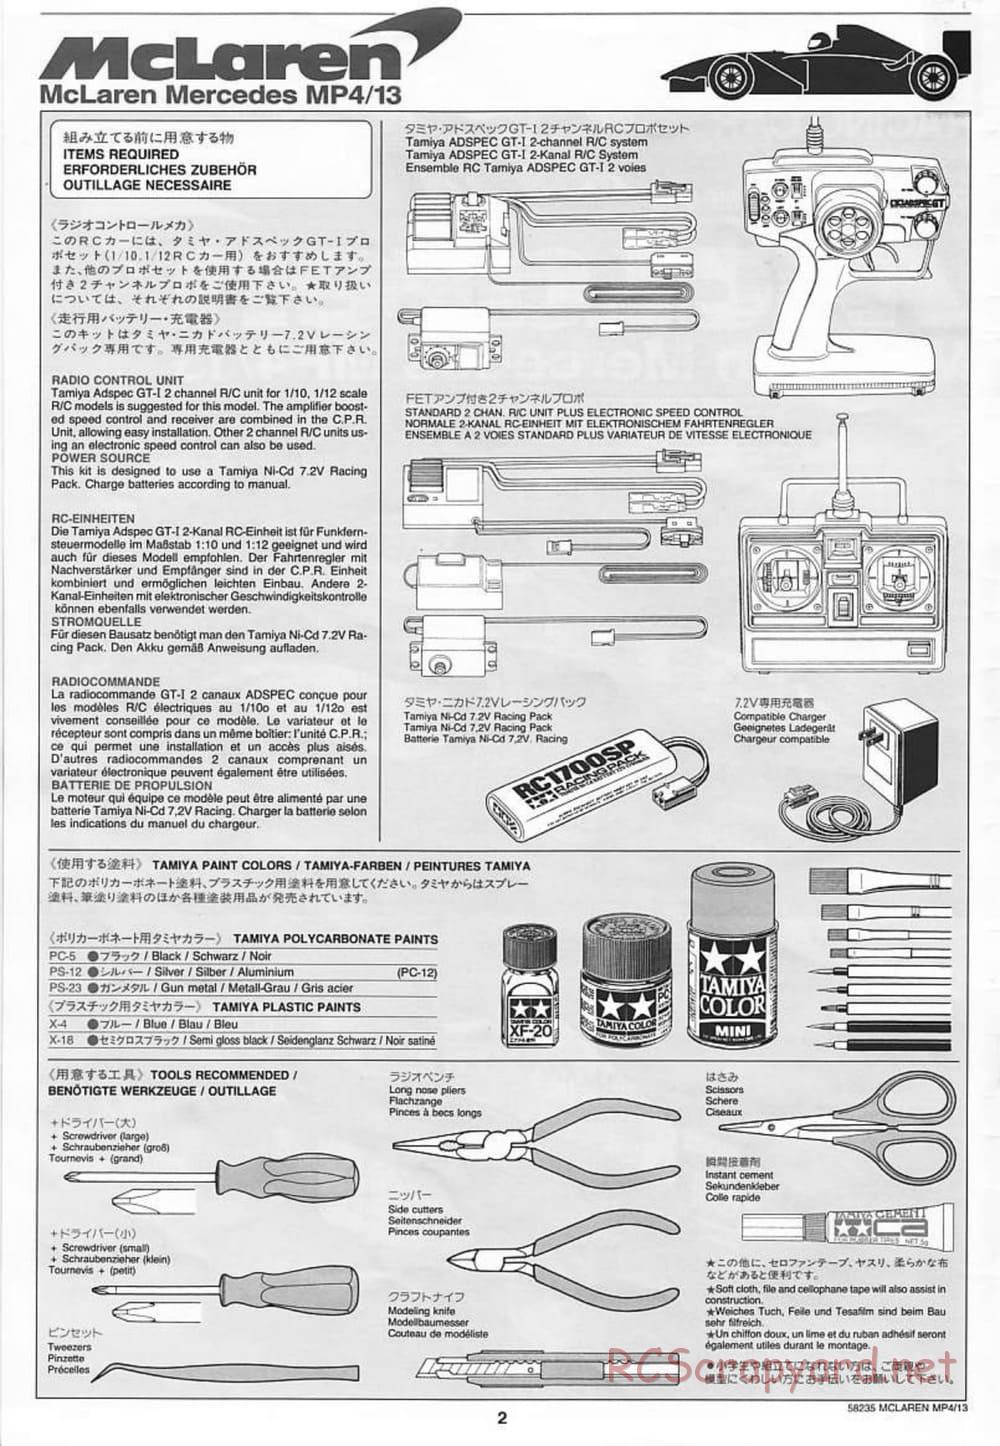 Tamiya - McLaren Mercedes MP4/13 - F103RS Chassis - Manual - Page 2